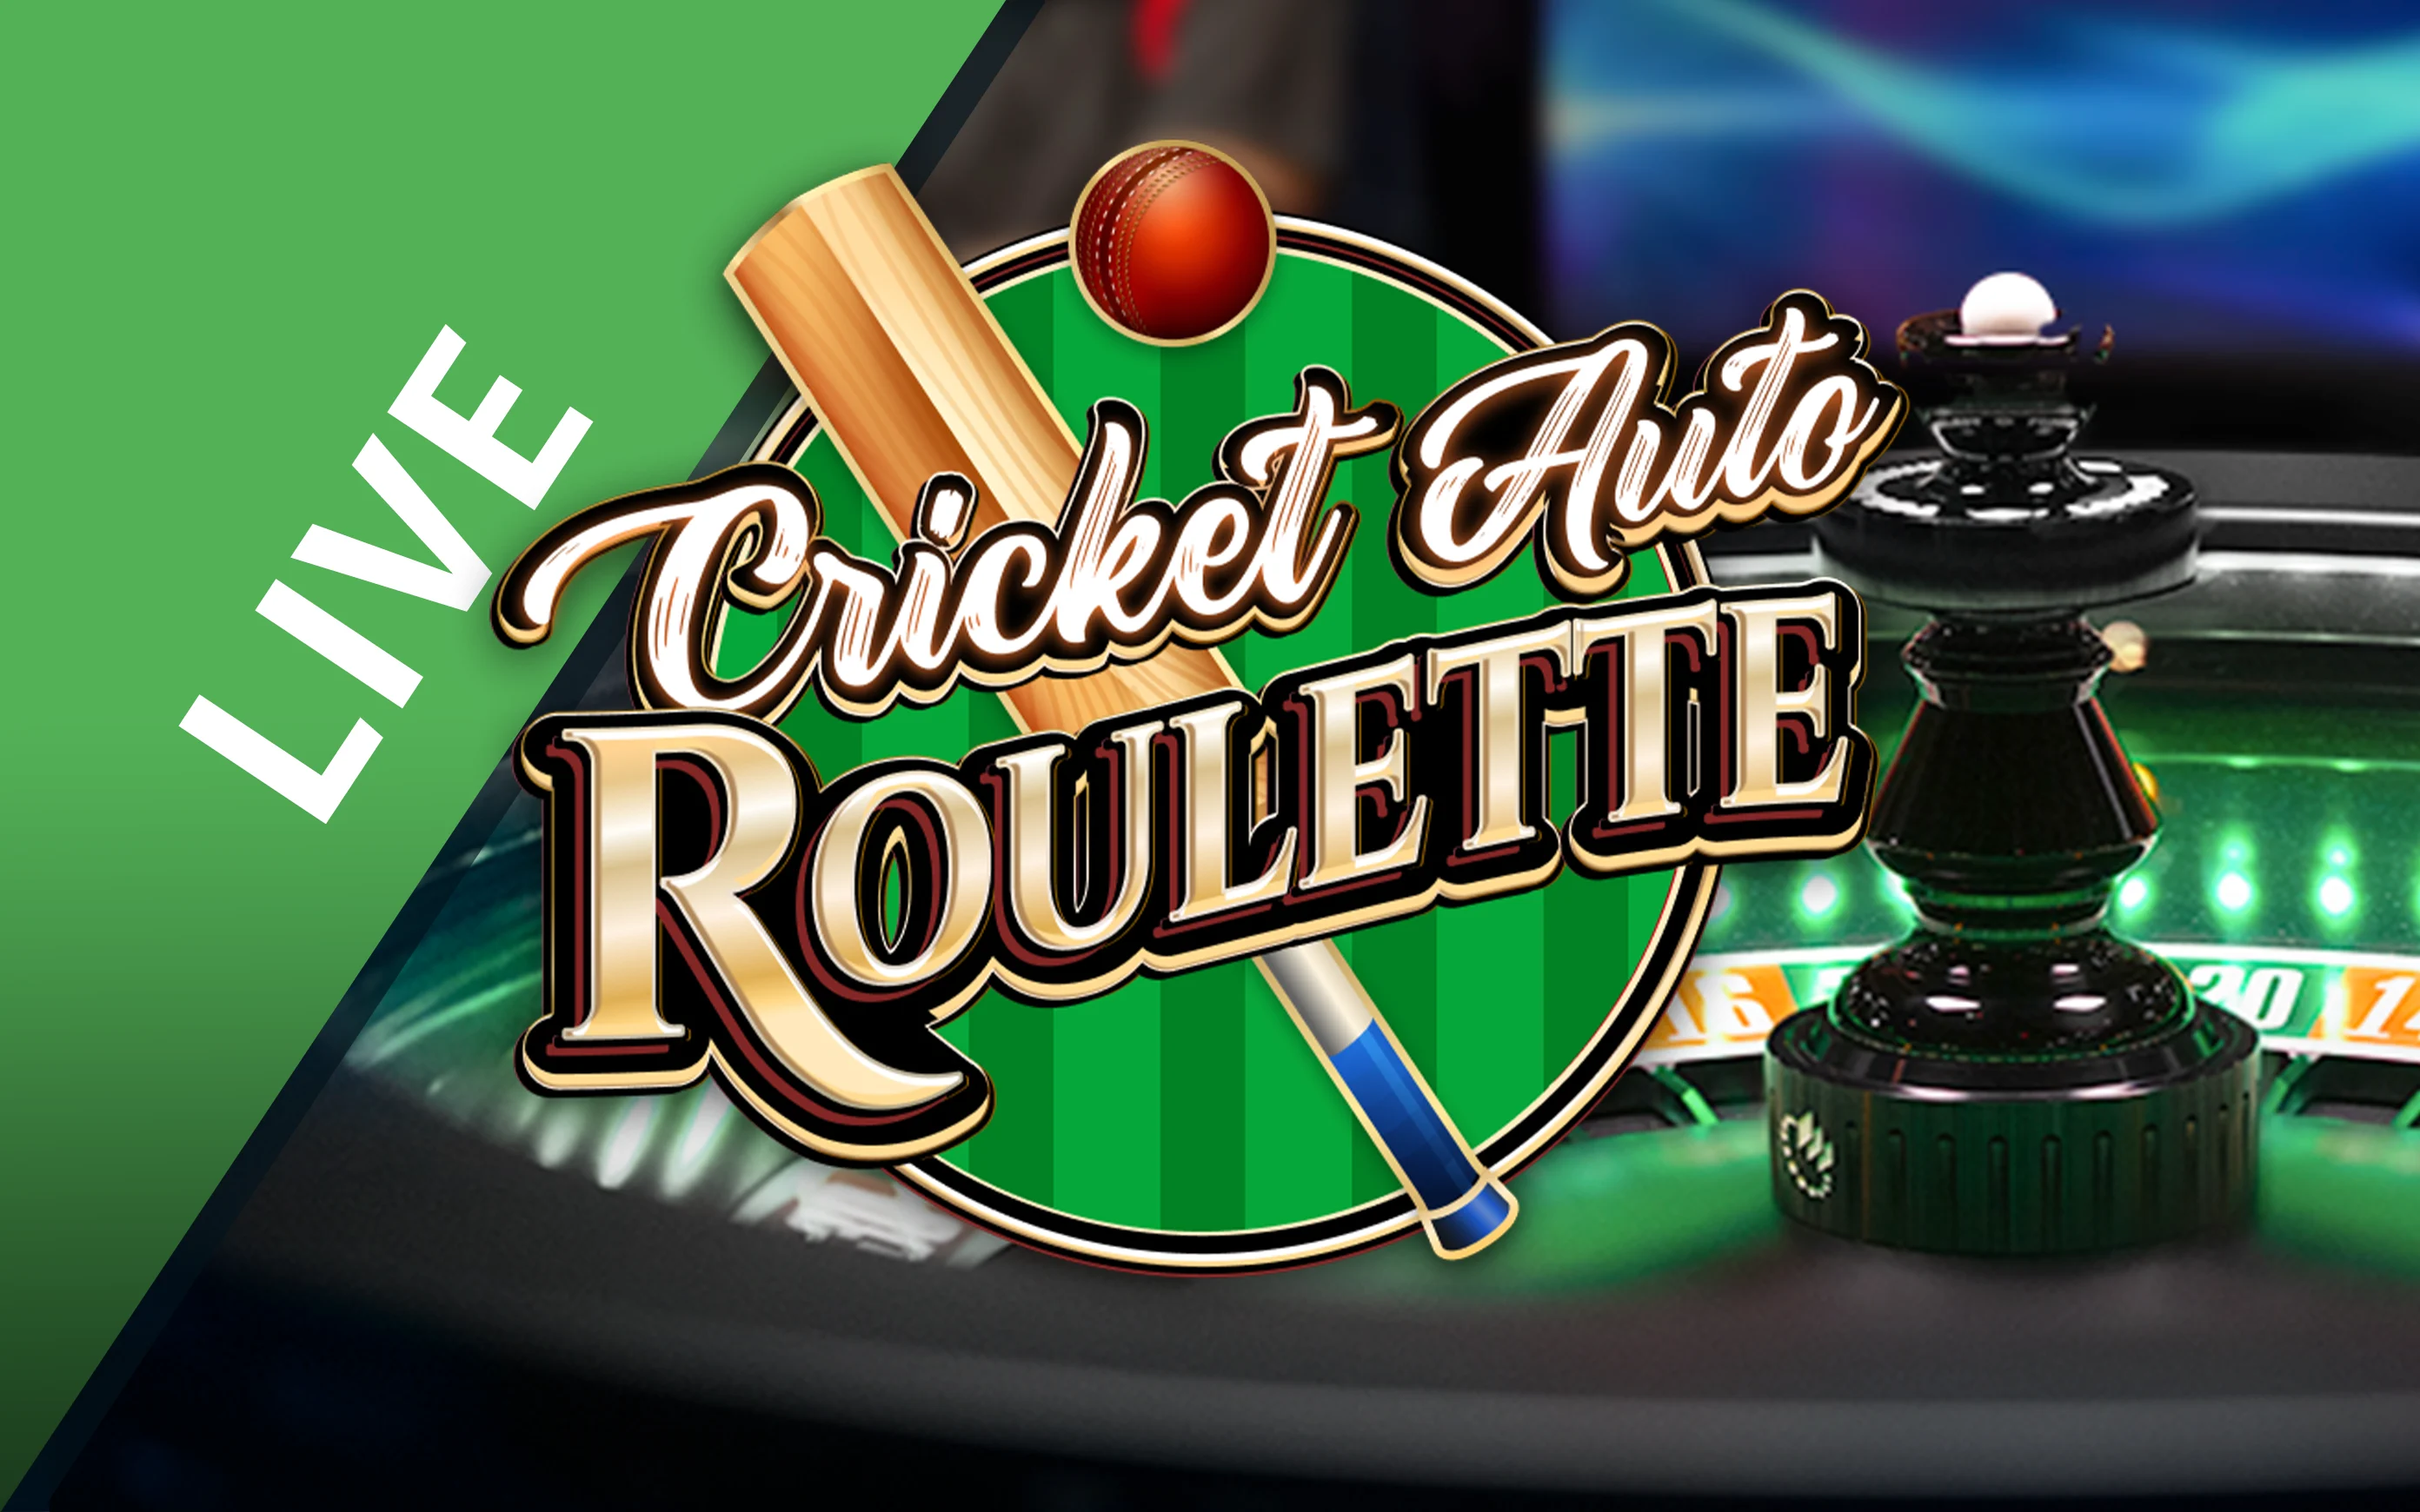 Play Cricket Auto Roulette on Starcasino.be online casino